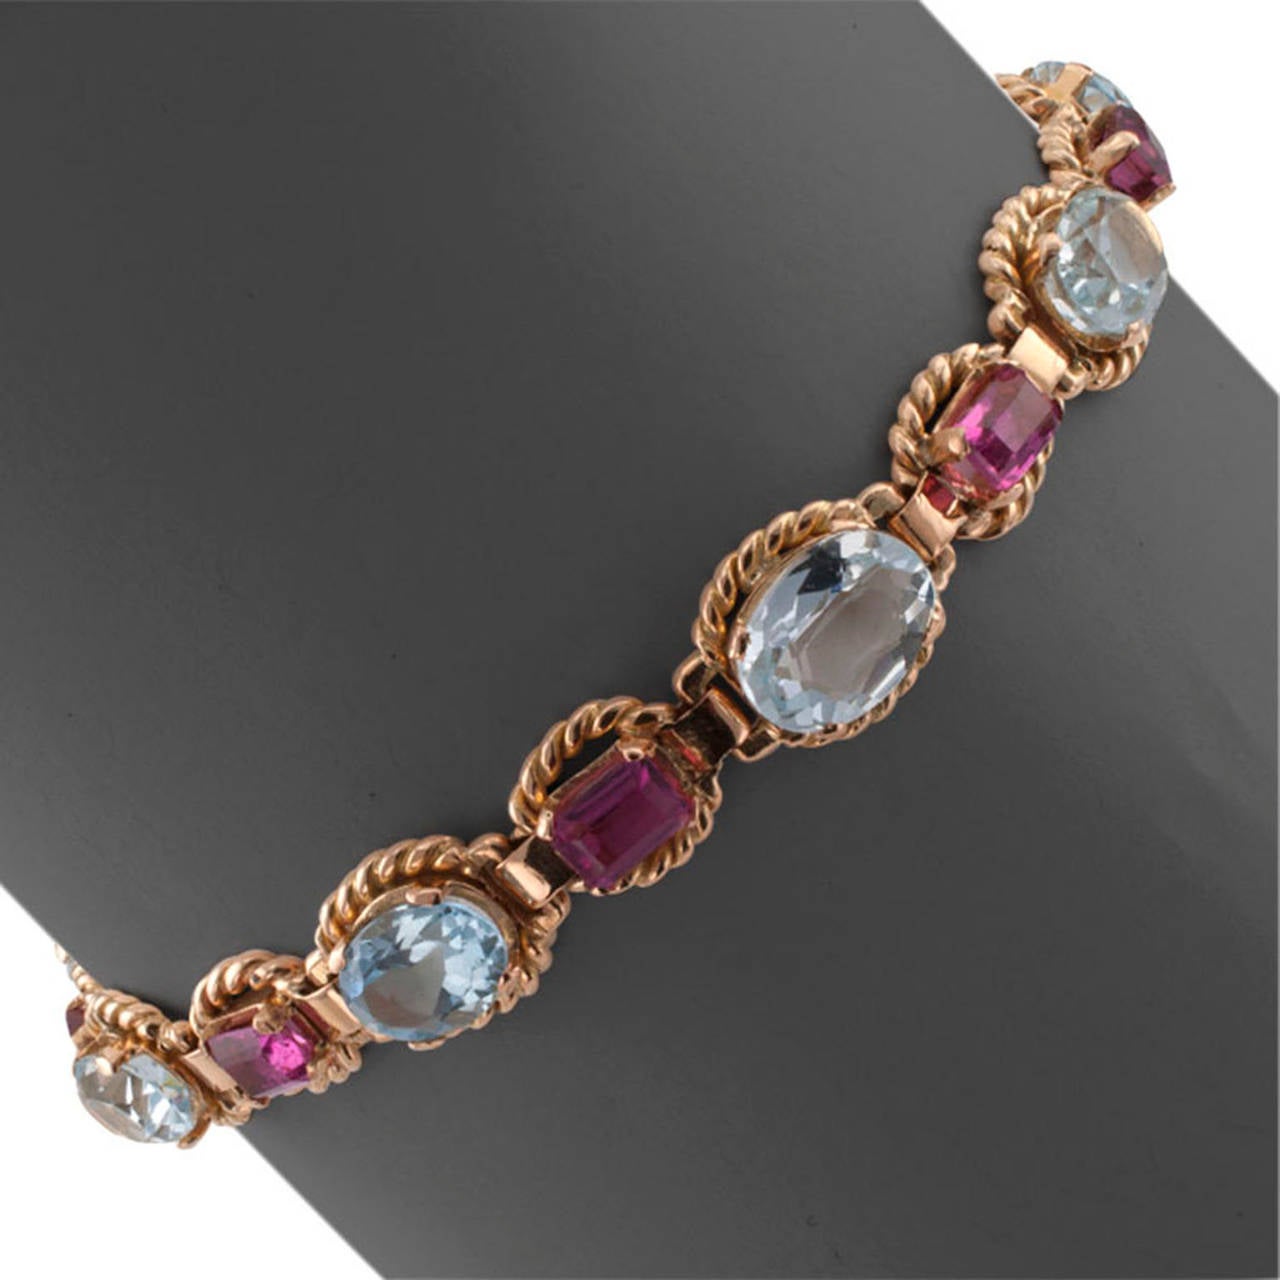 Aquamarine and Pink Tourmaline 18 Karat Gold Bracelet, circa 1950,  features a striking color combination between nine oval-shaped aquamarines alternating with eight rectangular pink tourmalines, each individually framed in corded gold with